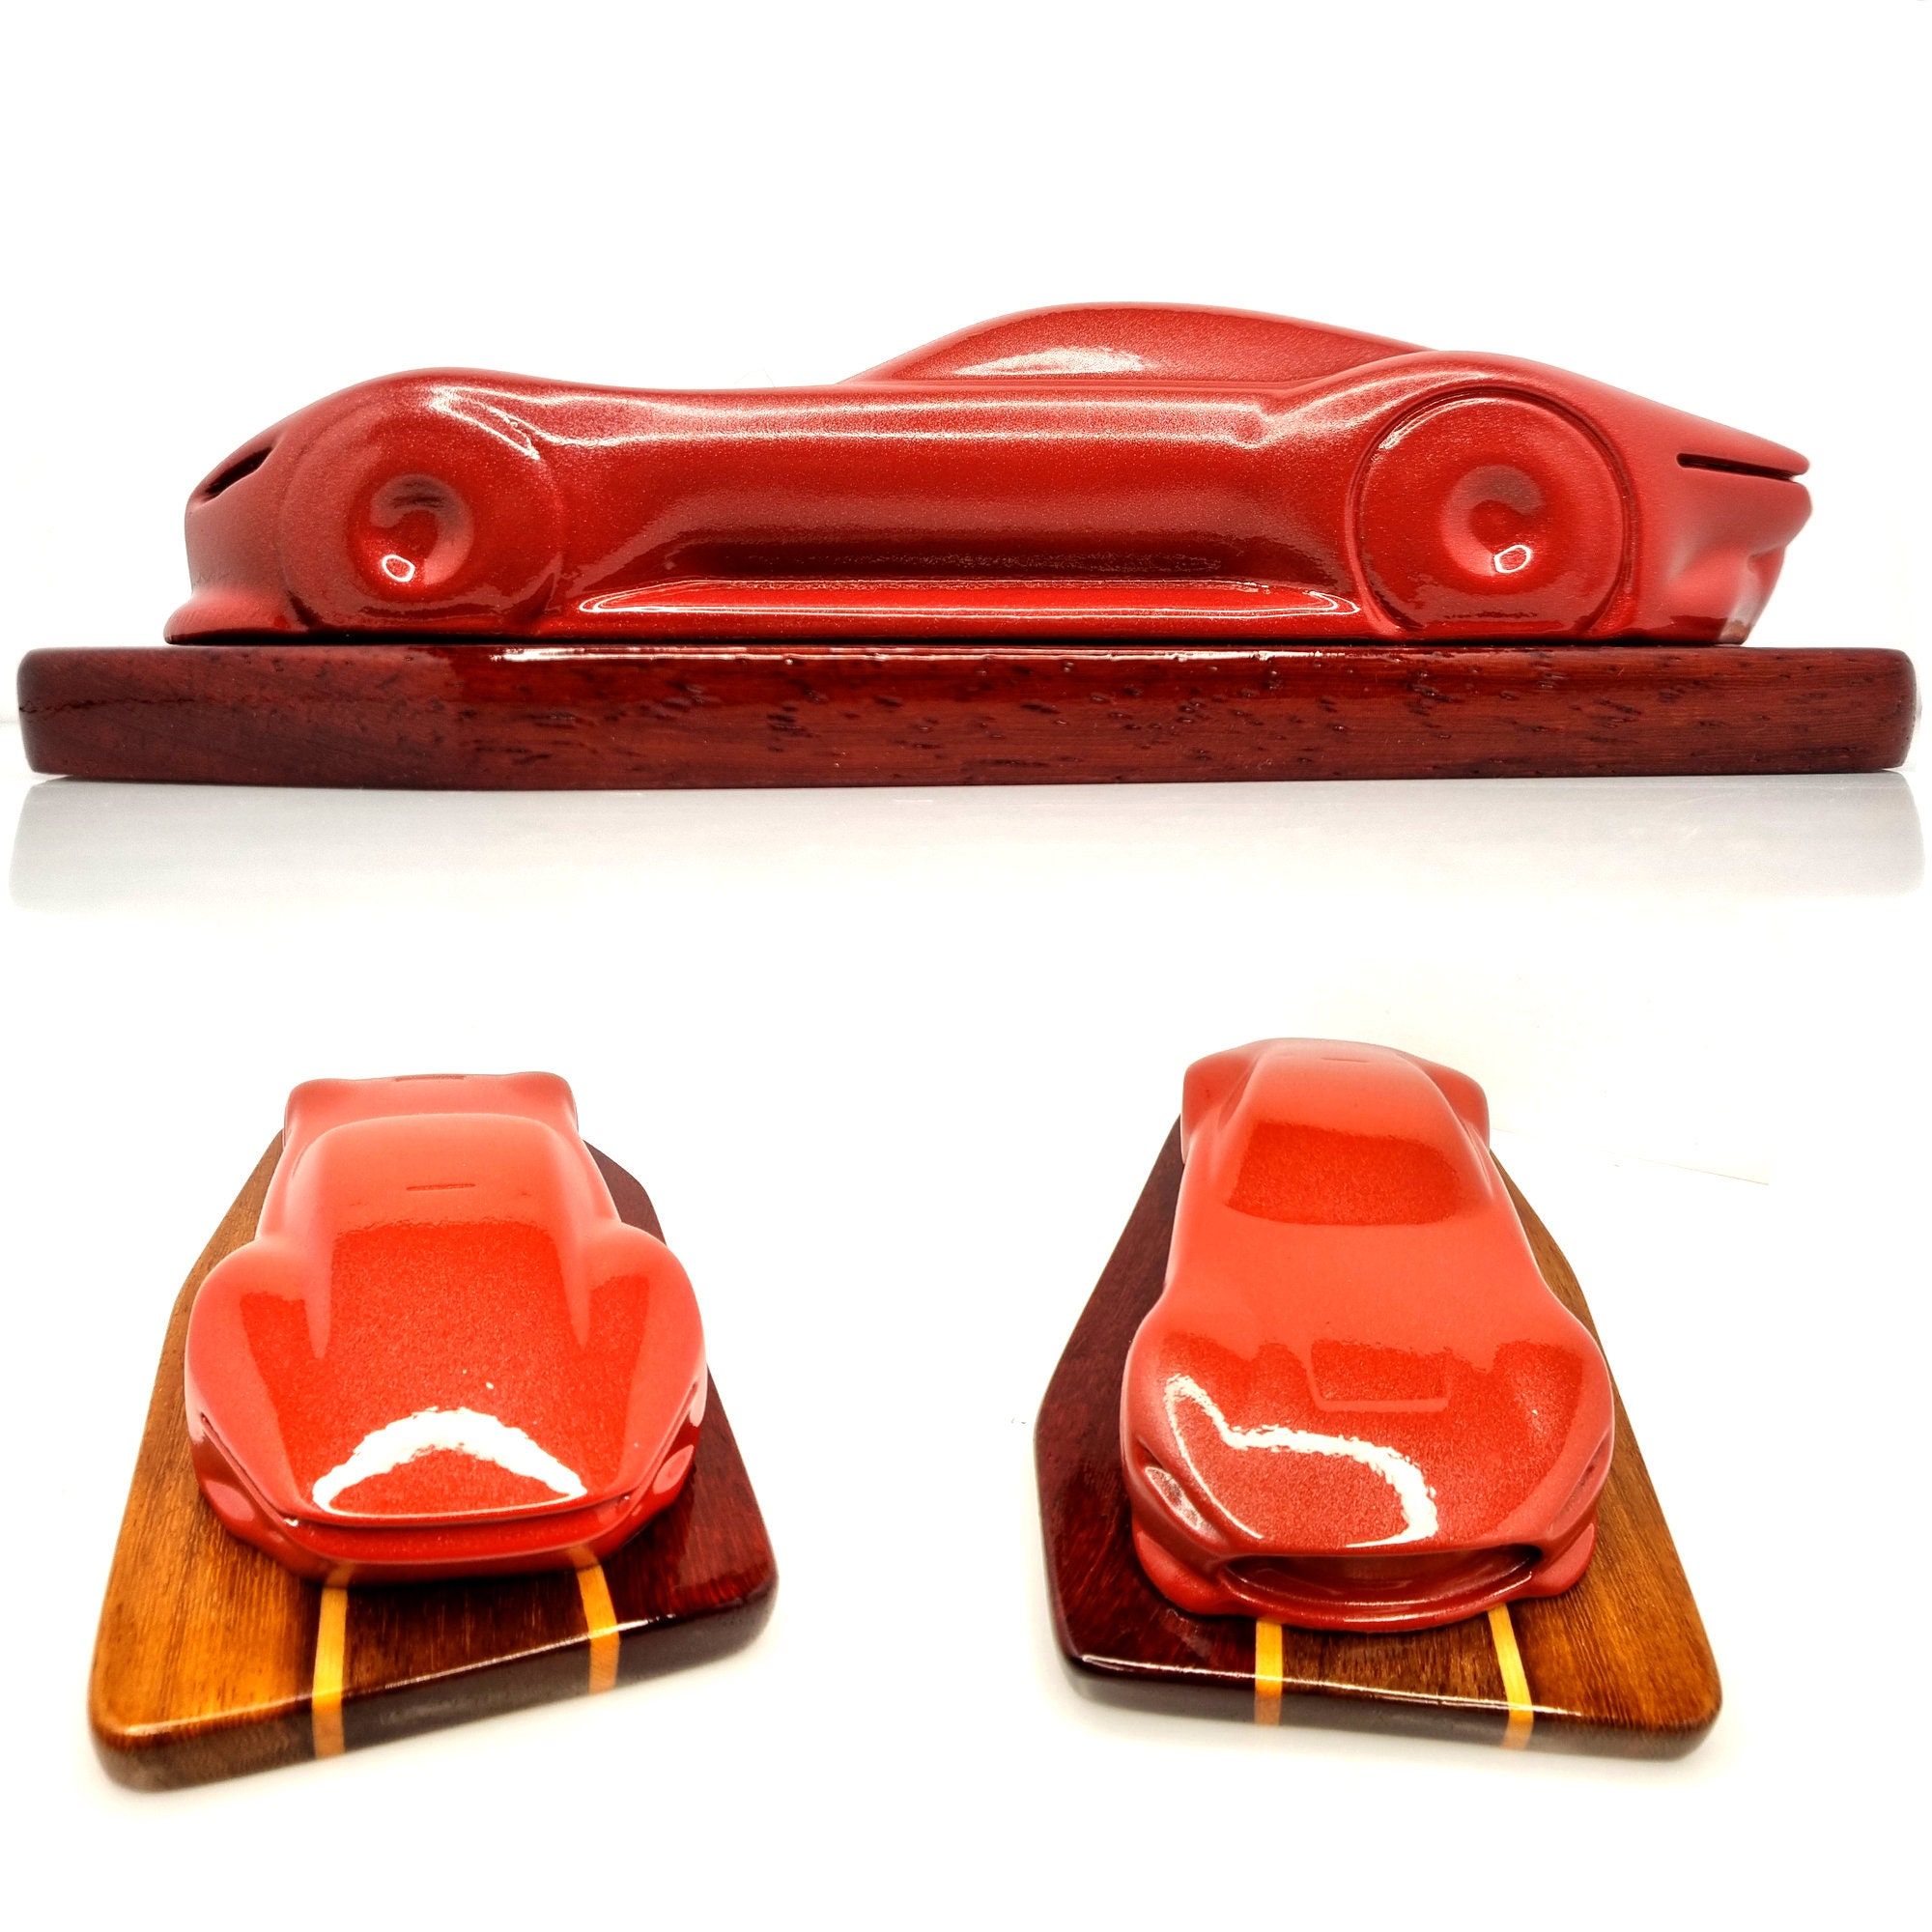 Car Coaster Mold, 2.5 Inch, Shiny Mold, Silicone Molds for Epoxy